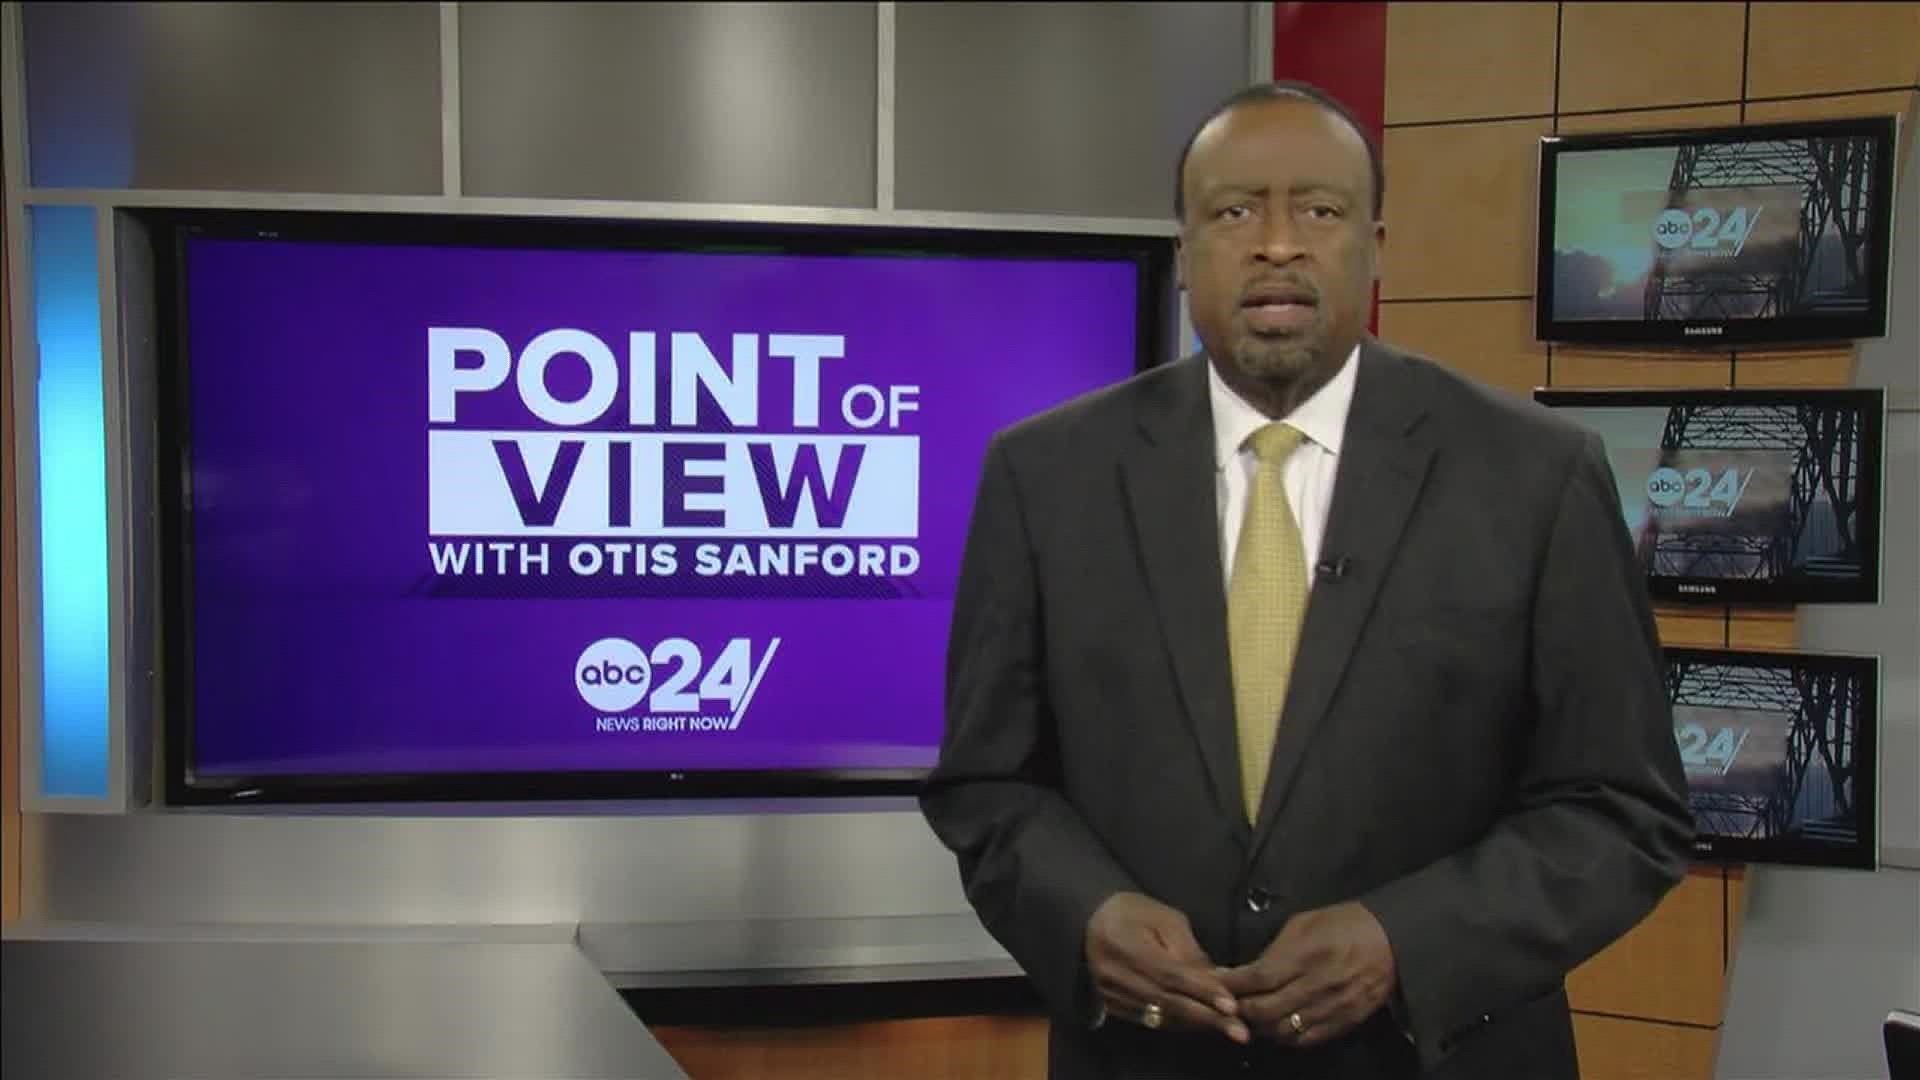 ABC 24 political analyst and commentator Otis Sanford shared his point of view on the opioid epidemic in Shelby County.